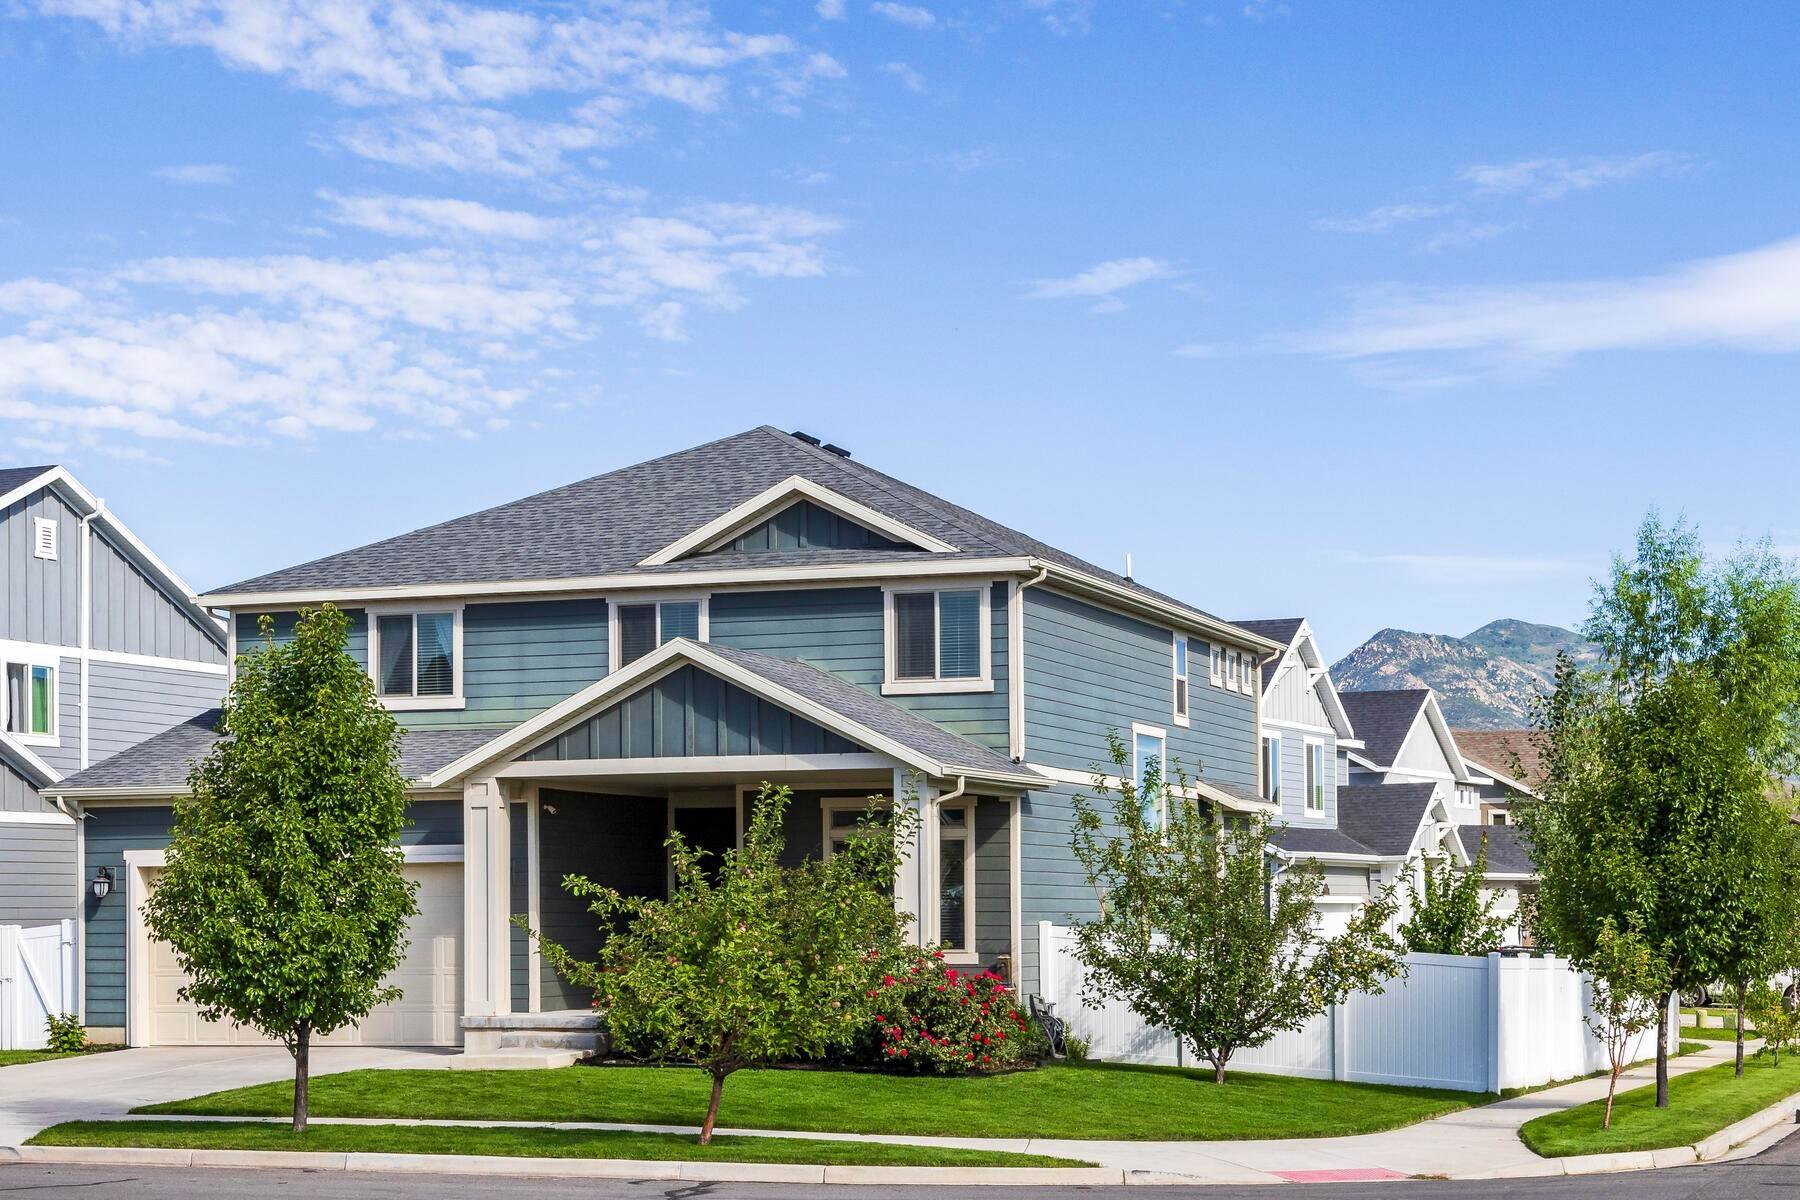 46. Single Family Homes for Sale at Immaculate Home, Beautiful Curb Appeal, and Basement Just Finished! 536 West 1200 South Heber City, Utah 84032 United States